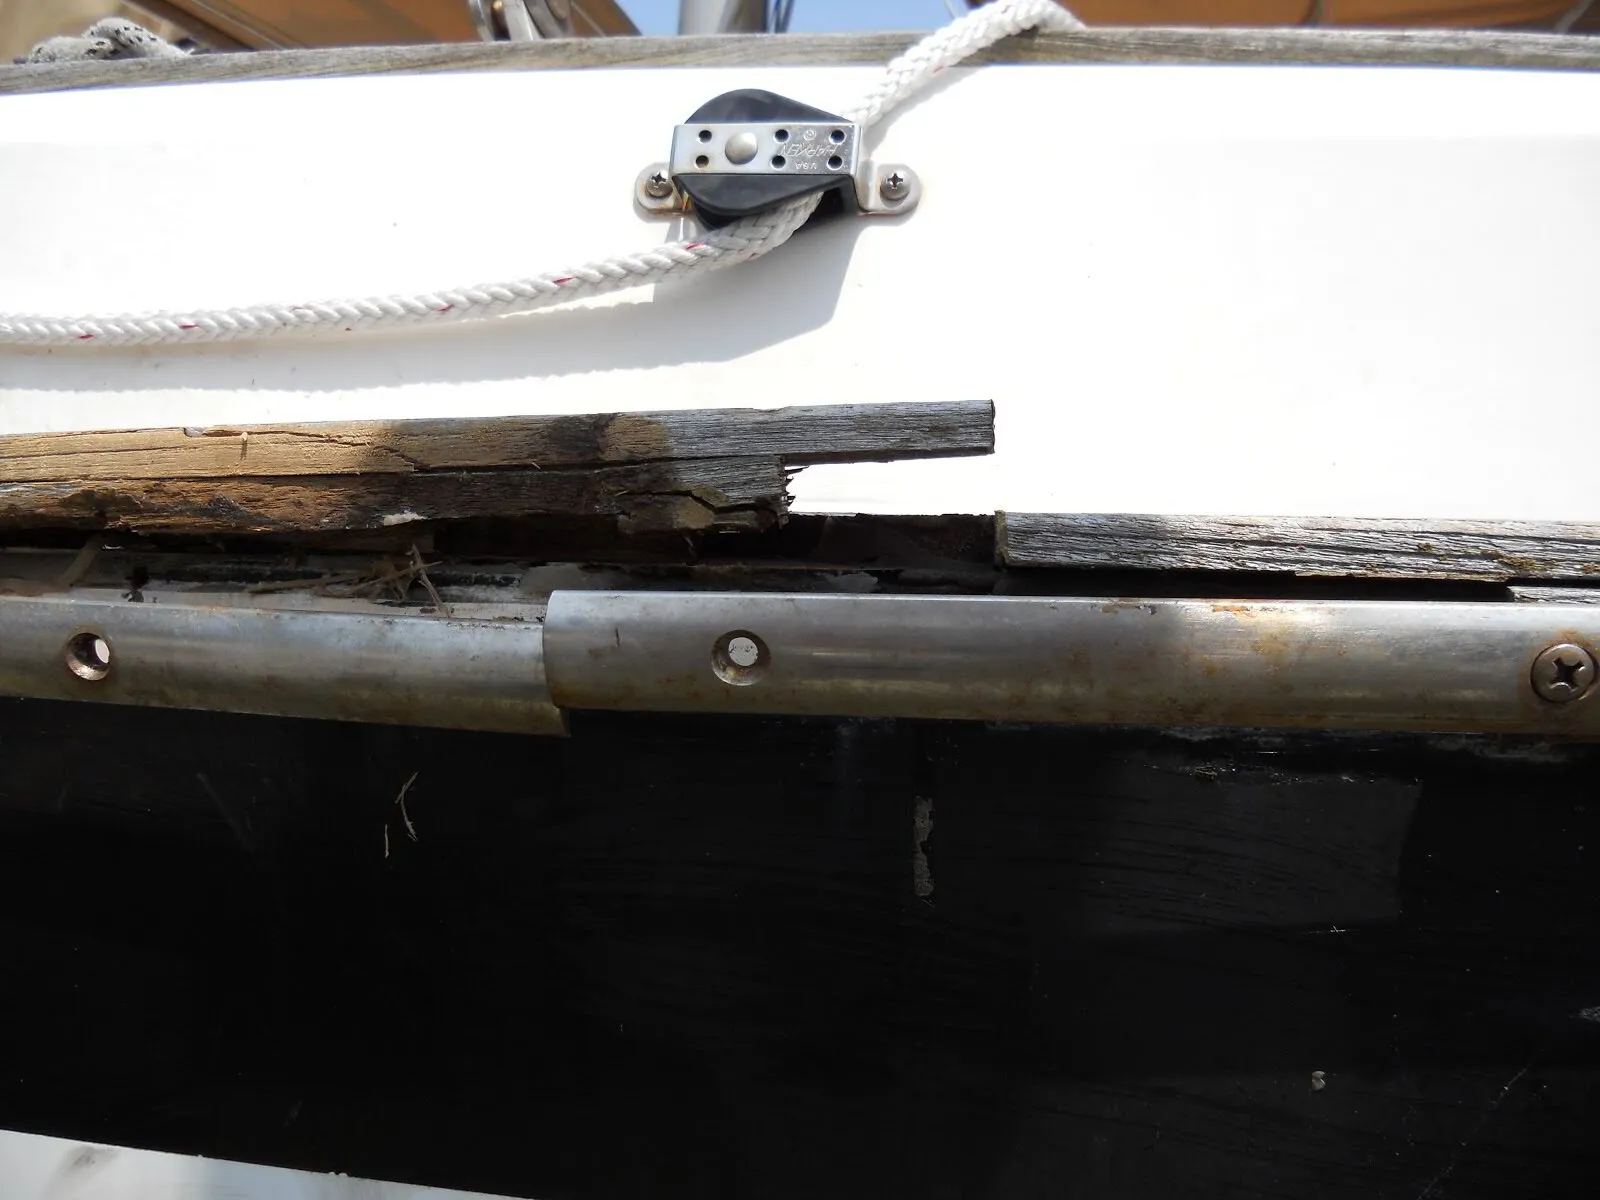 Love Your Boat? Then Get a Rub Rail Repair or Replacement